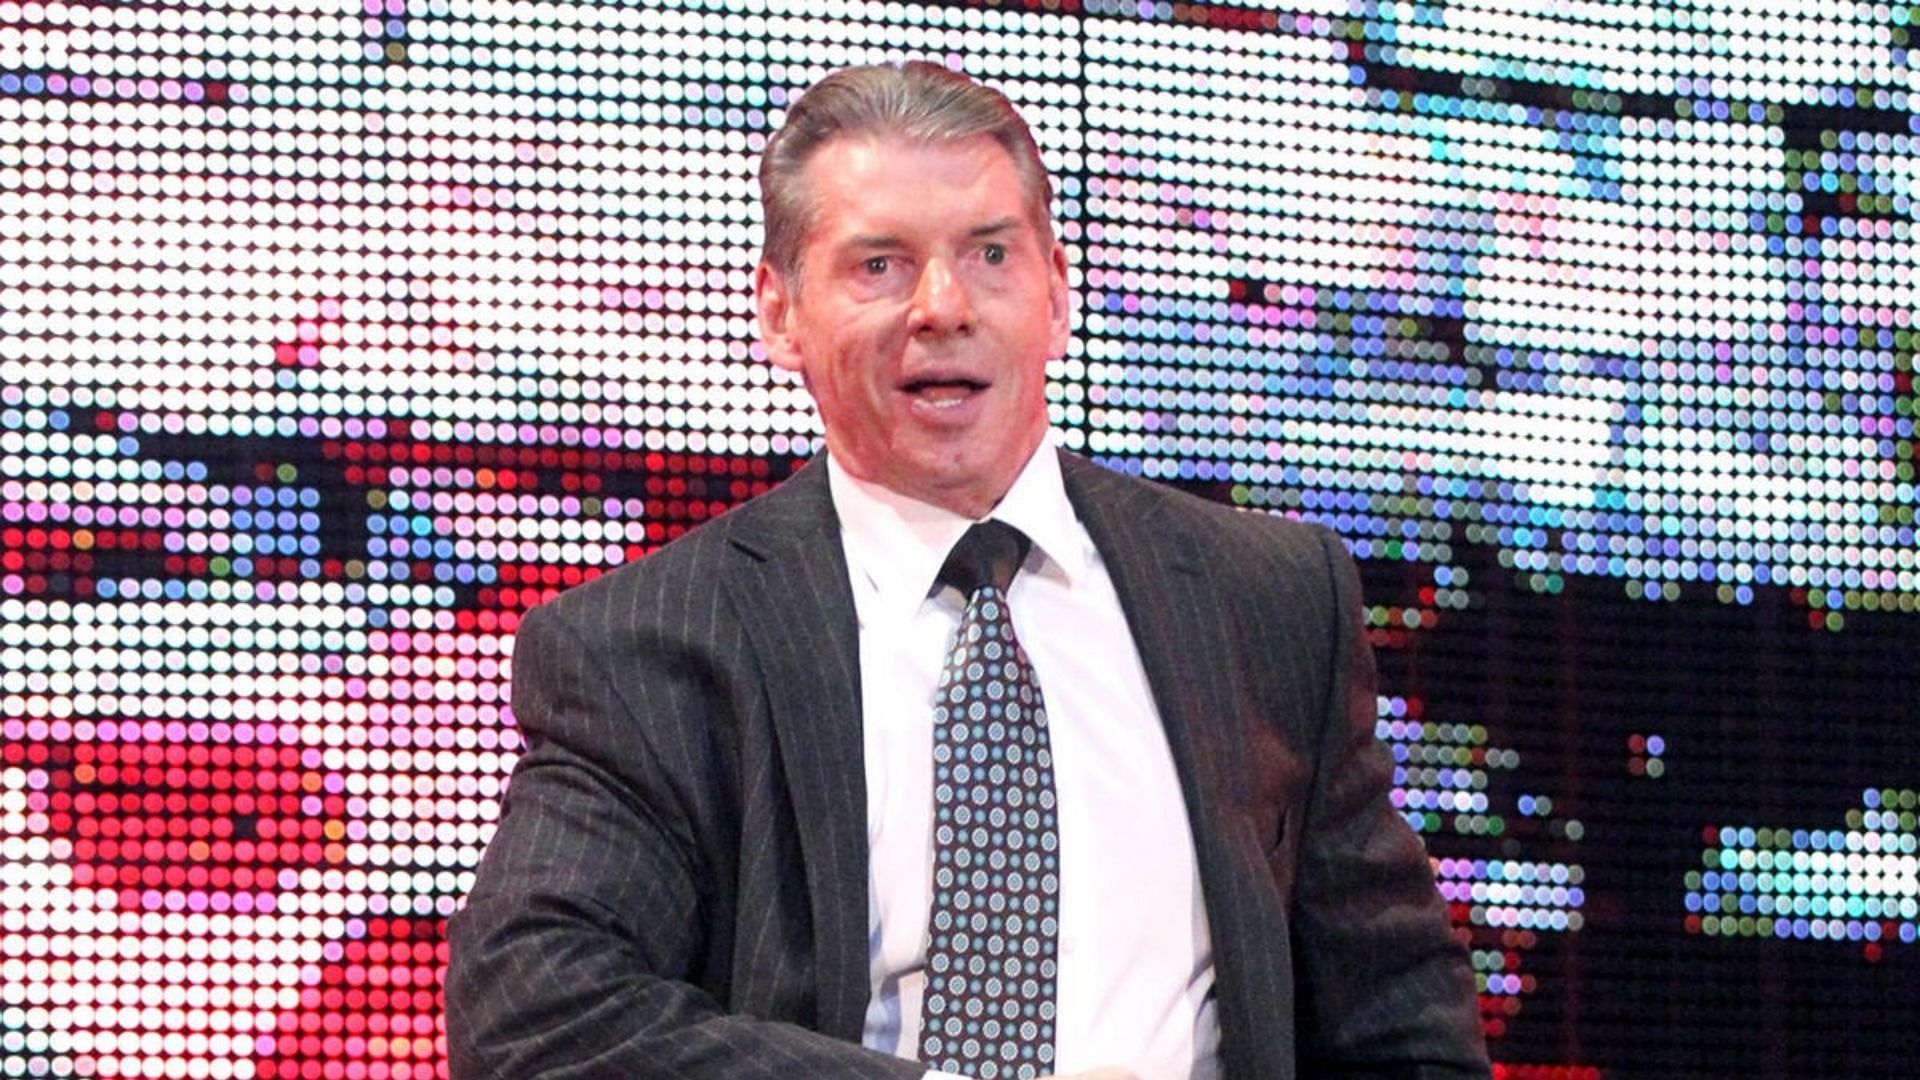 The former WWE boss always knew which star he liked and whom he didn